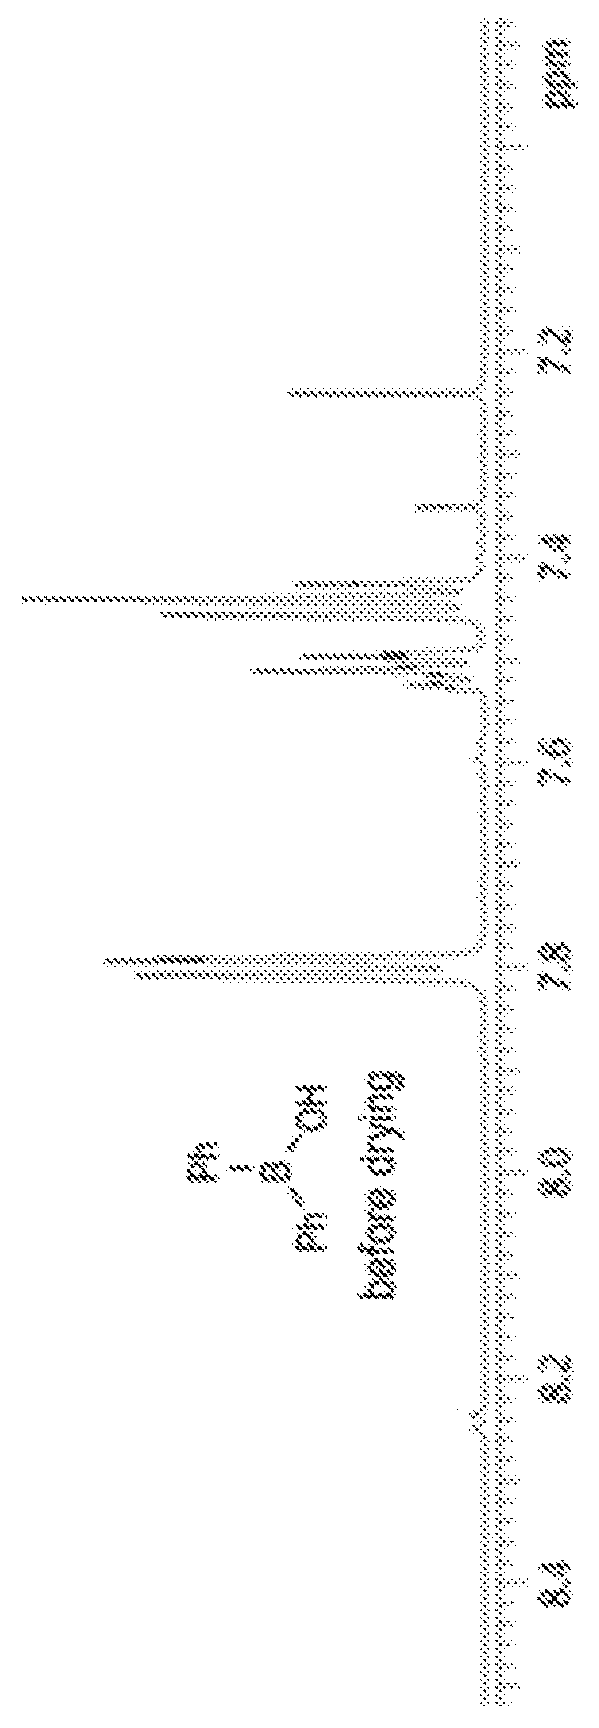 Born-Based Cycloaddition Catalysts and Methods for the Production of Bio-Based Terephthalic Acid, Isophthalic Acid and Poly (Ethylene Terephthalate)